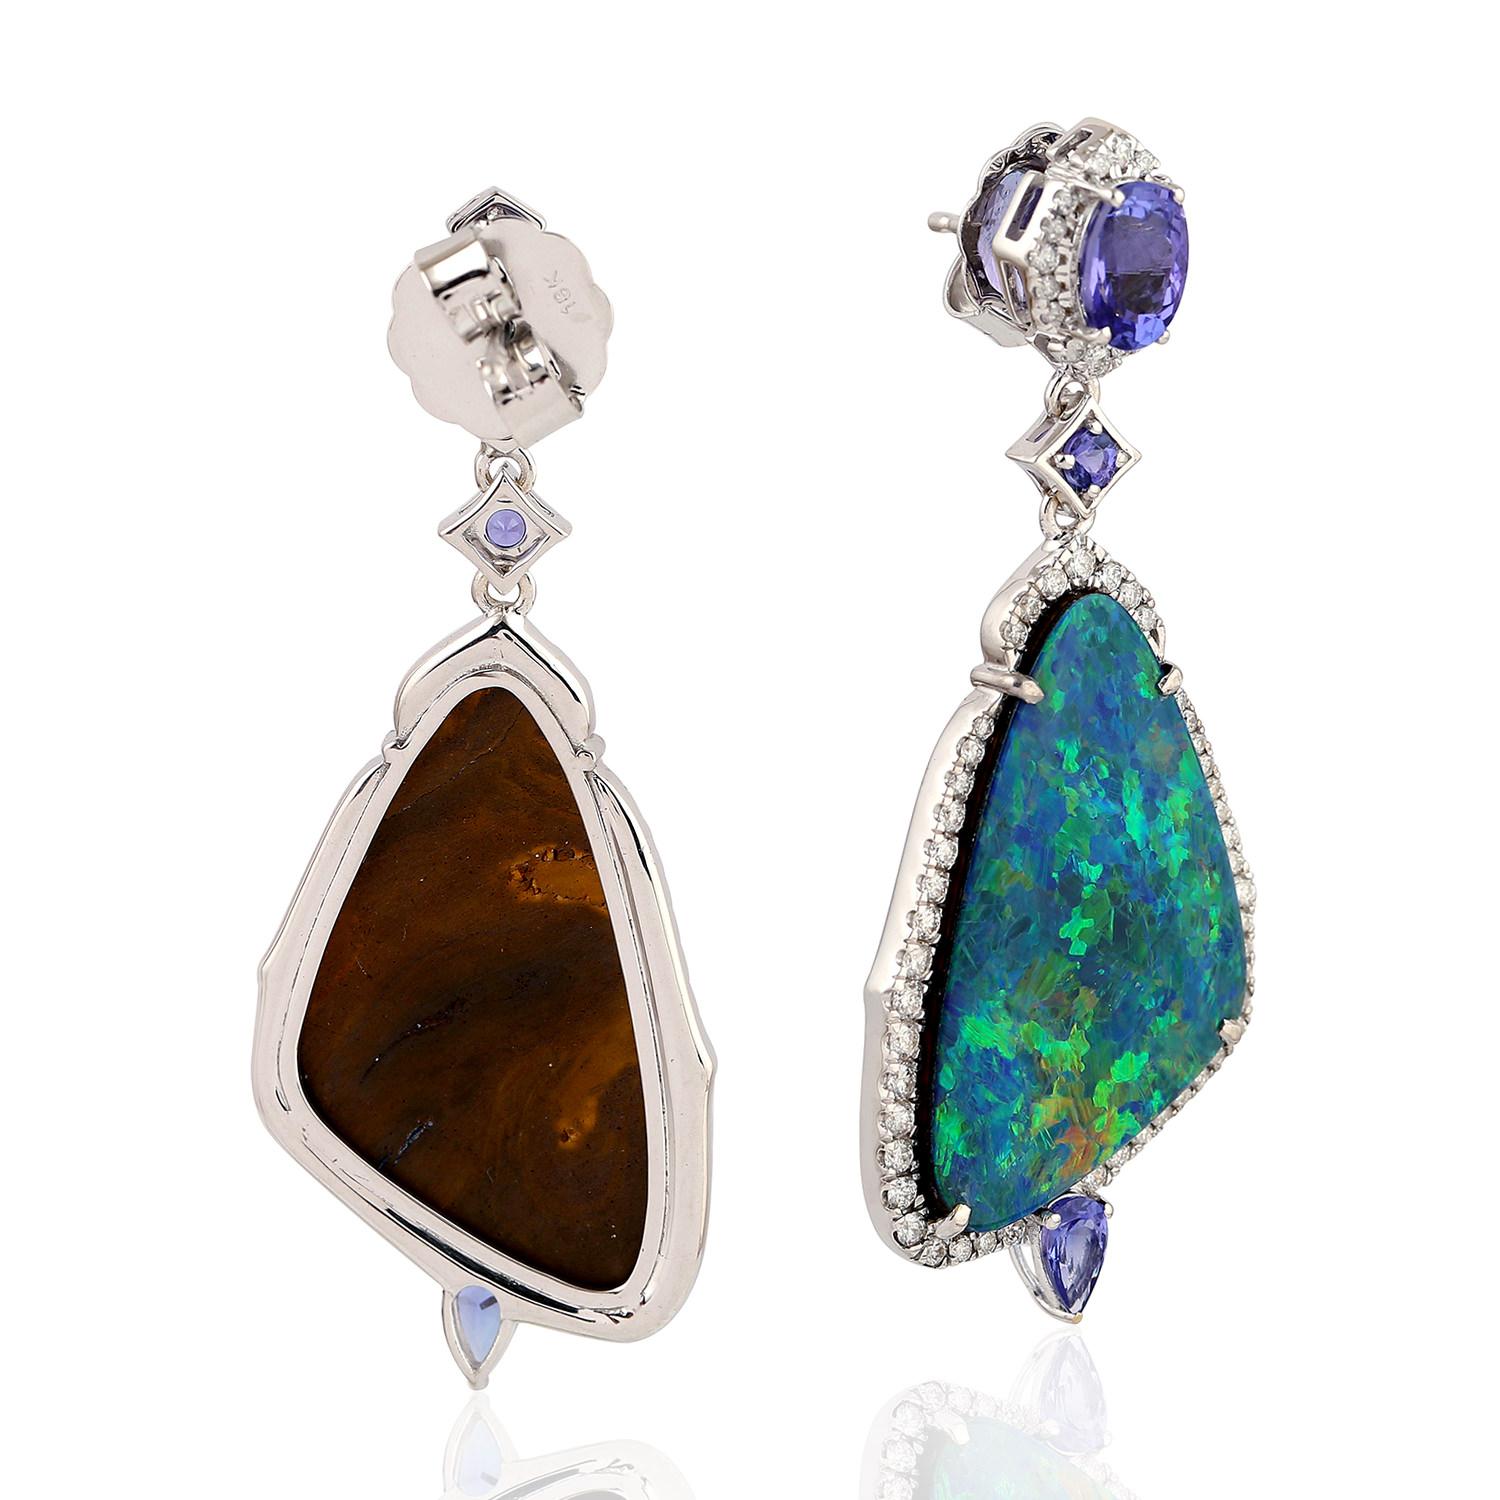 Contemporary 20.81ct Opal Dangle Earrings With Tanzanite & Diamonds Made In 18k White Gold For Sale